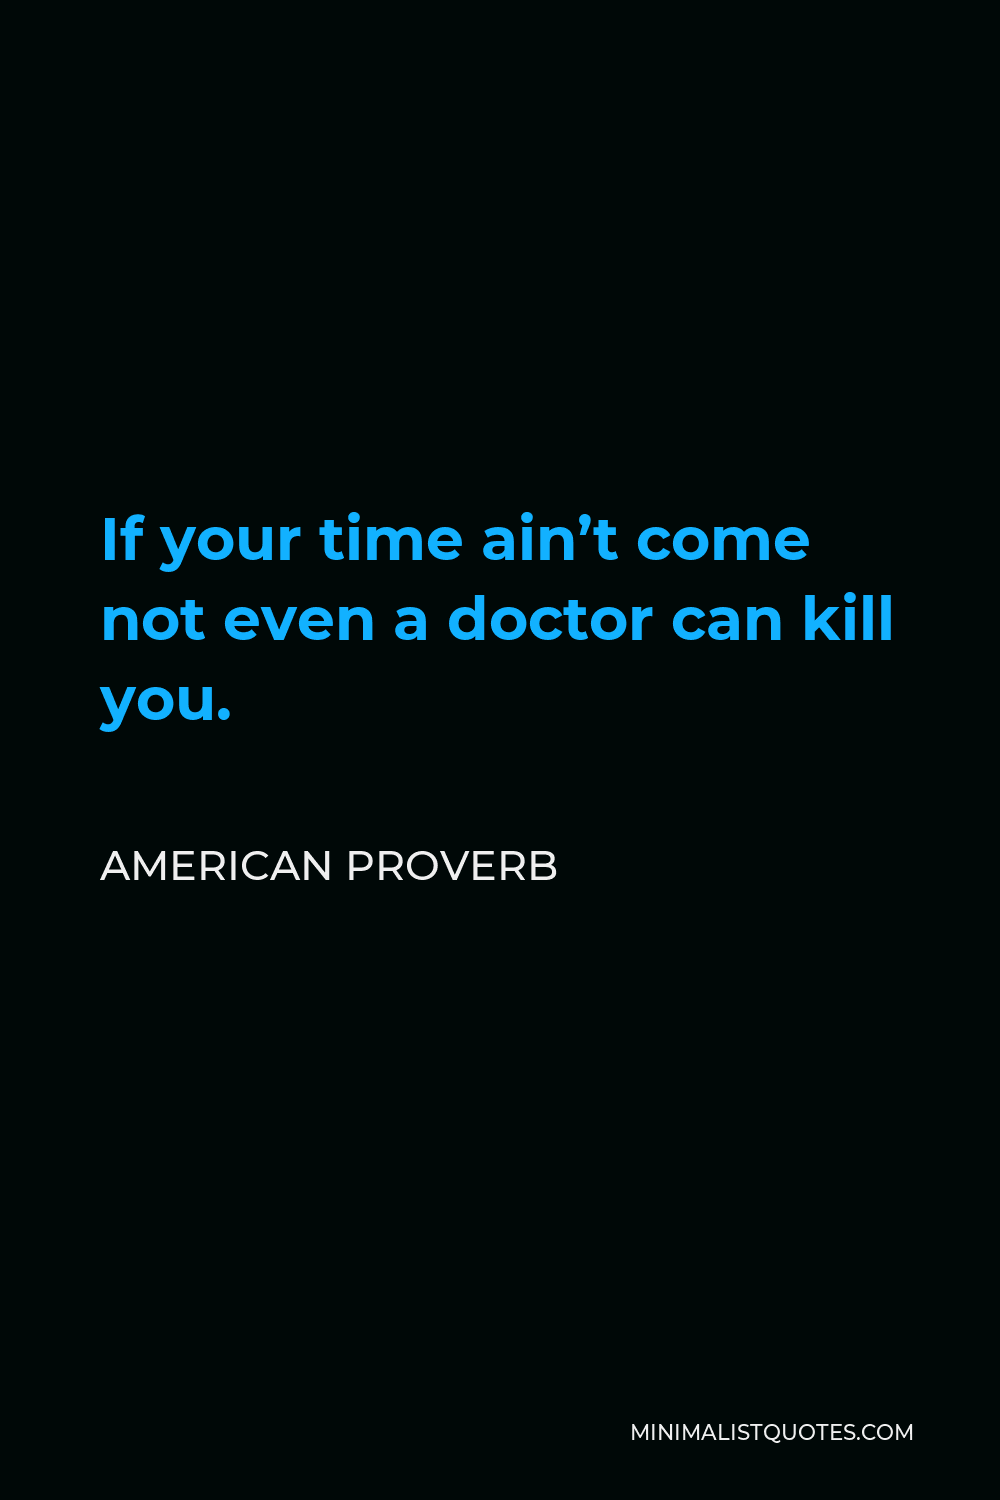 American Proverb Quote - If your time ain’t come not even a doctor can kill you.